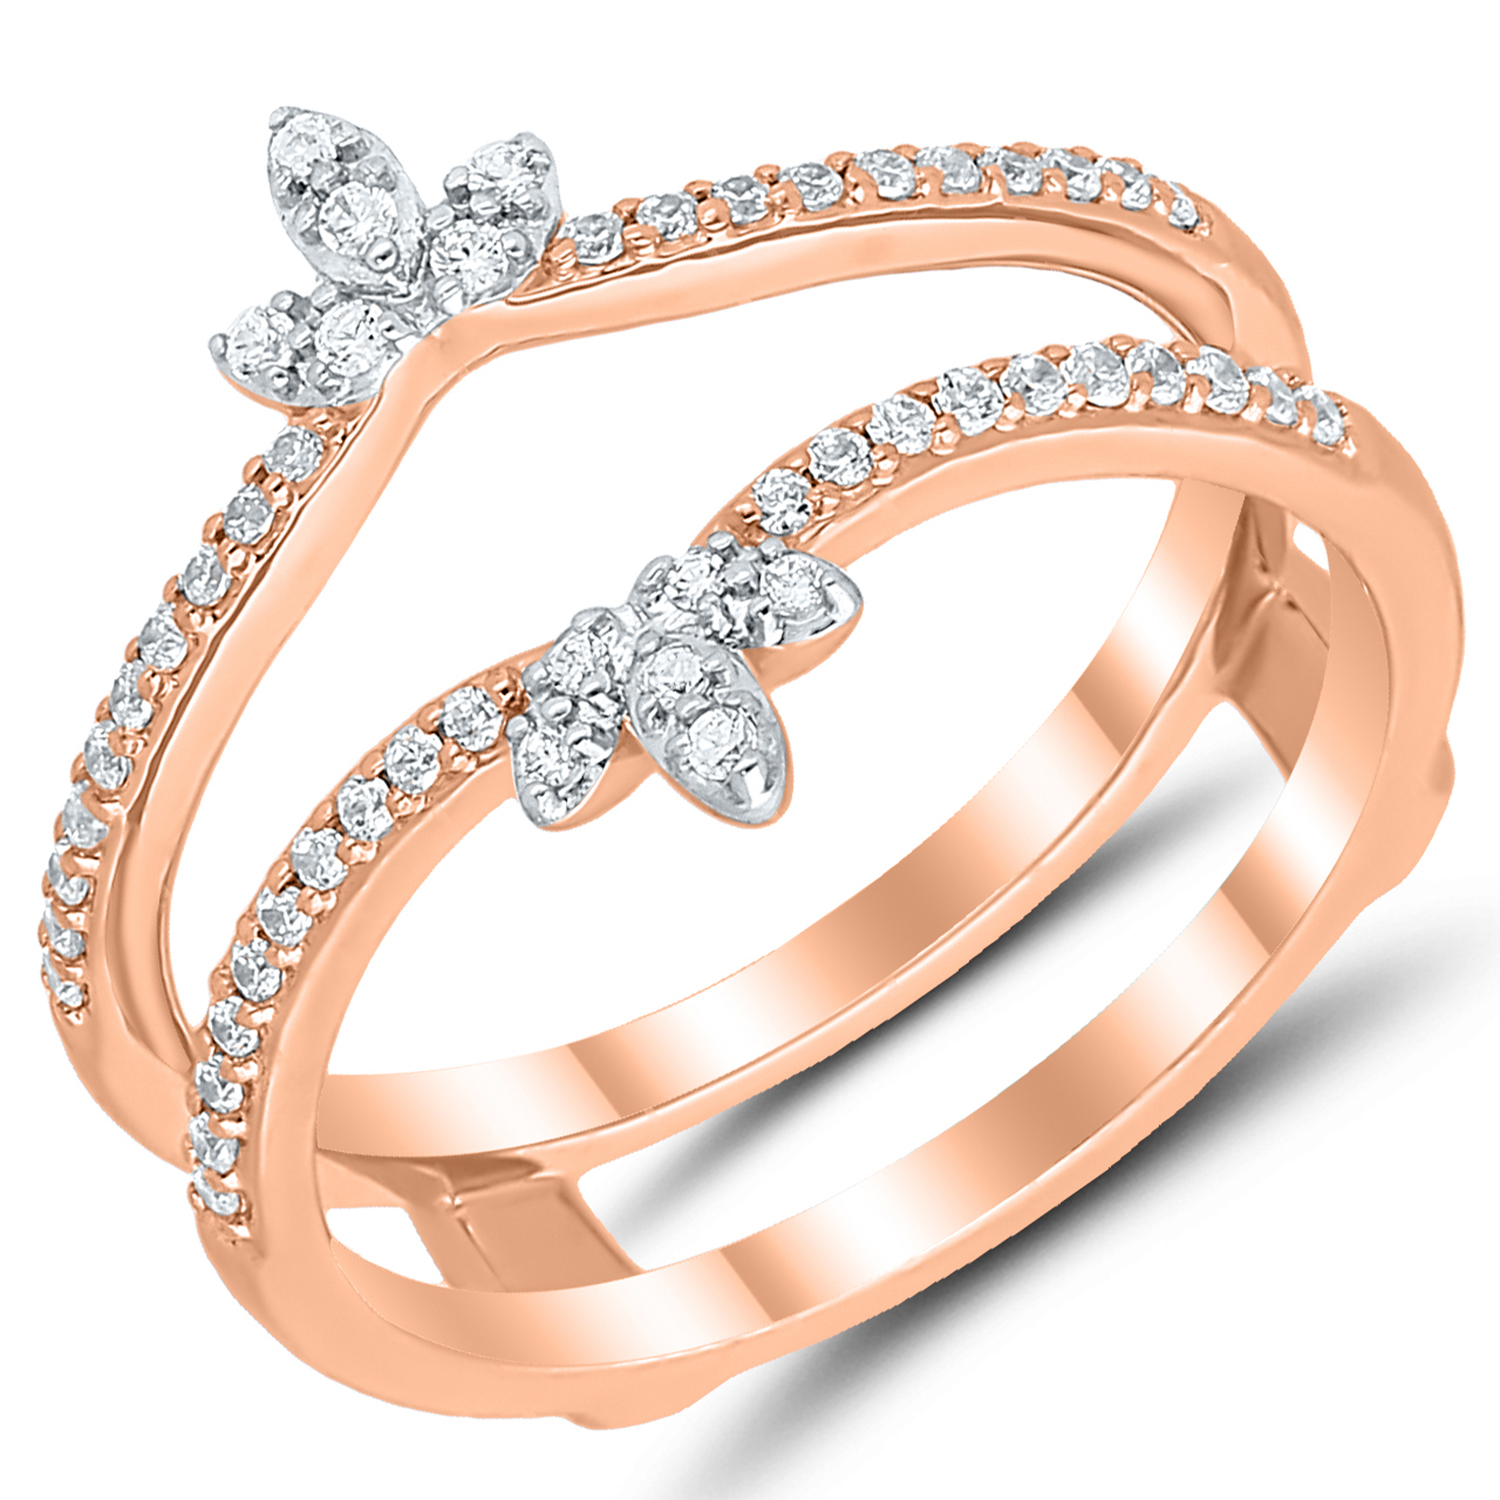 14K White Gold Diamond Ring Guard With Rose Gold Accent